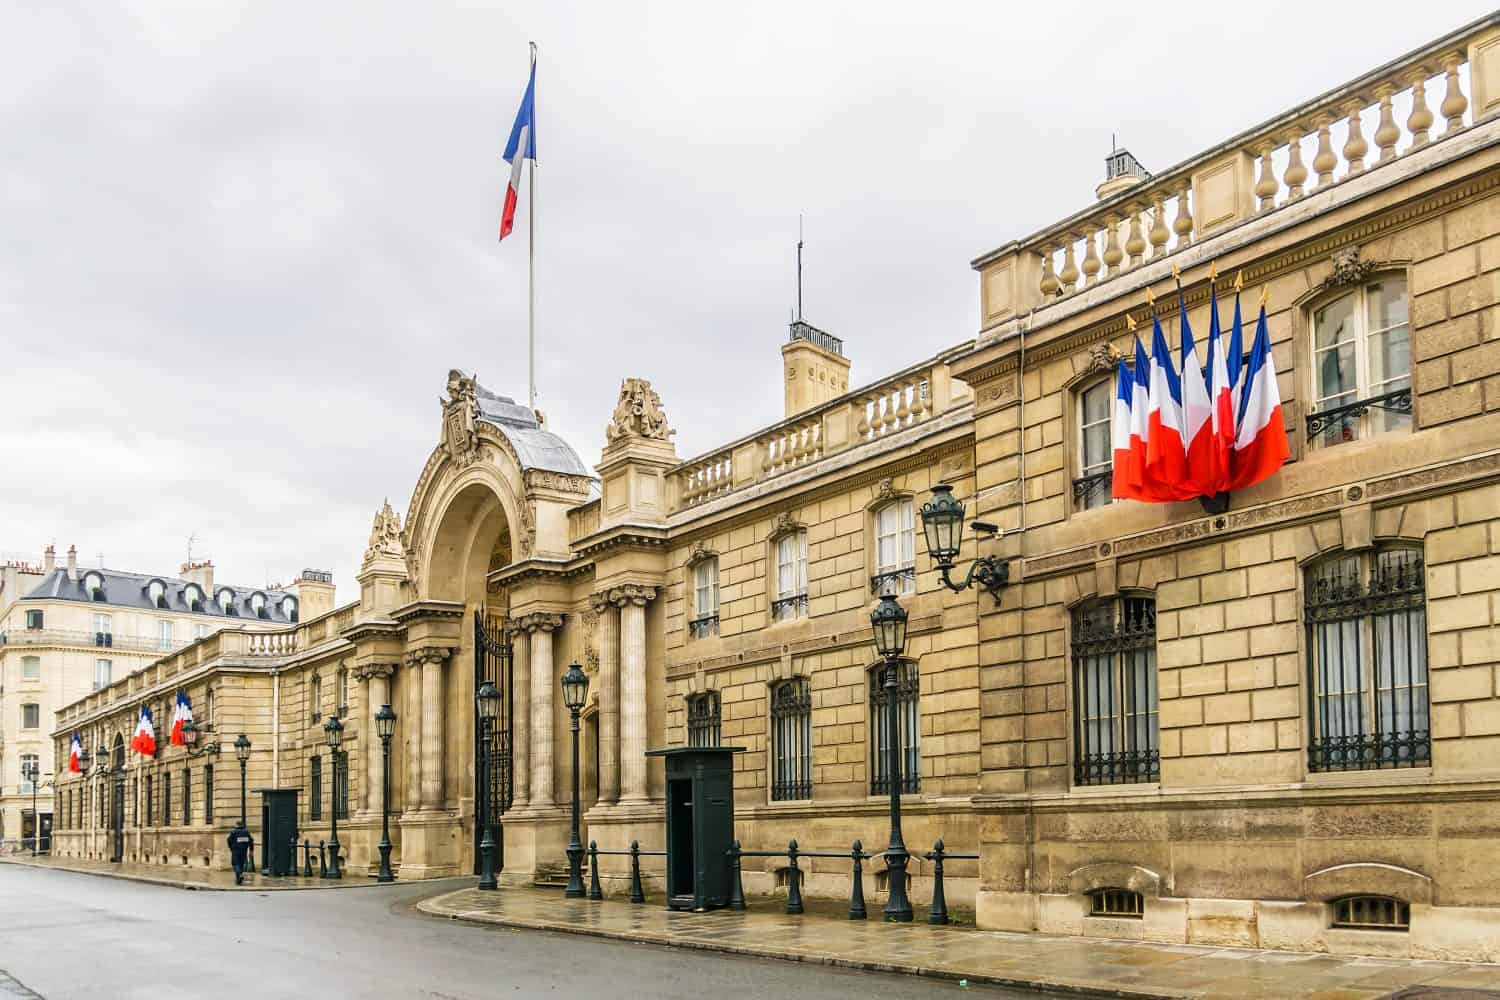 View of entrance gate of the Elysee Palace from the Rue du Faubourg Saint-Honore. Elysee Palace - official residence of President of French Republic since 1848.